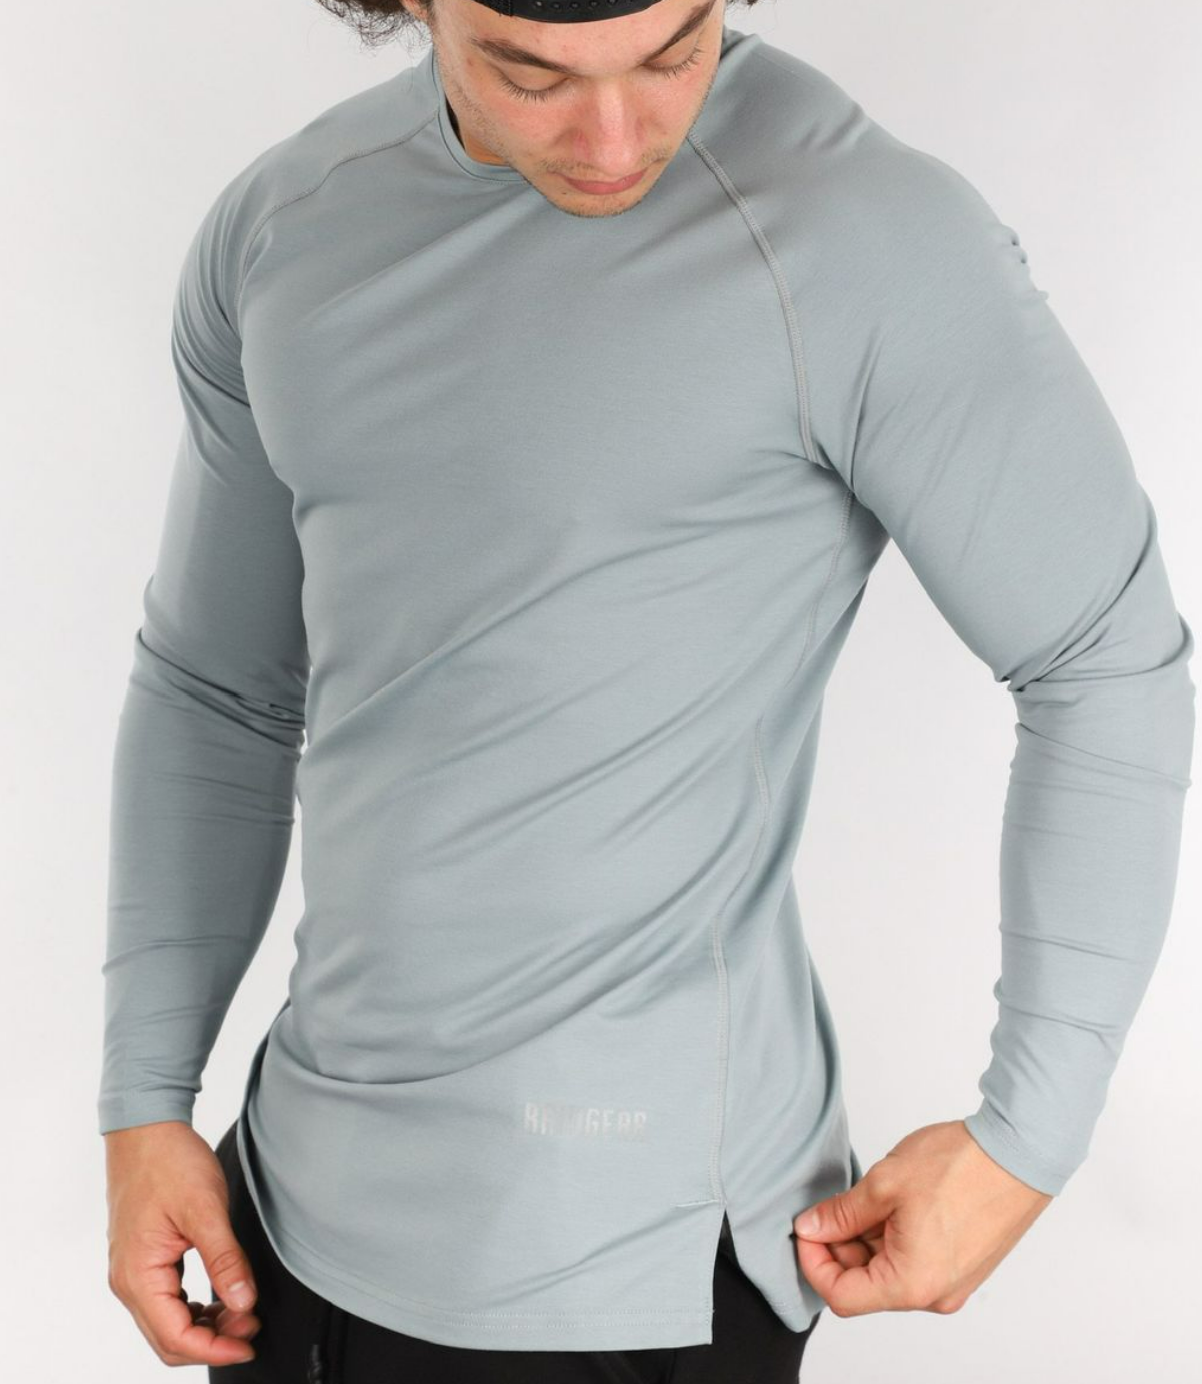 Wholesale Long Sleeves T-Shirts For Sale | Buy Tees Online